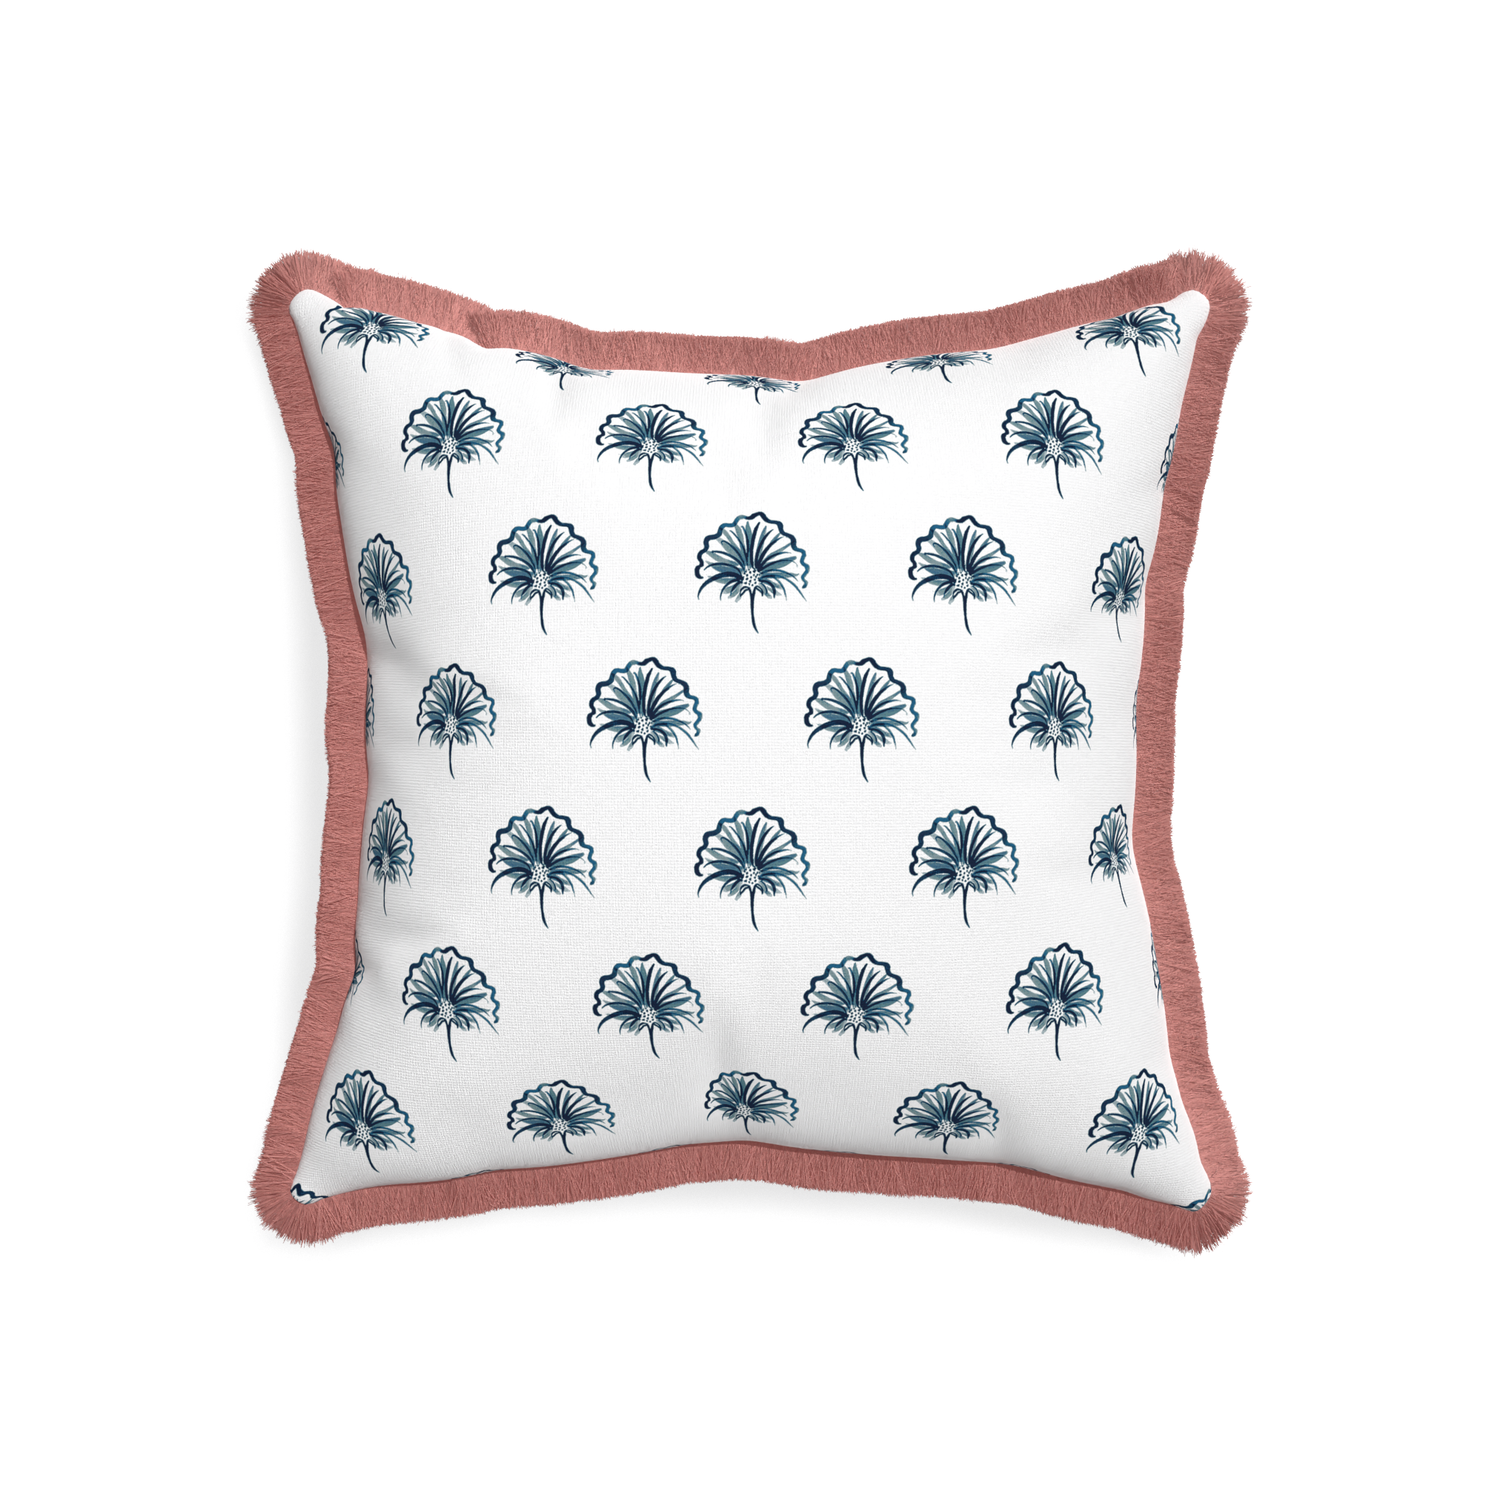 20-square penelope midnight custom pillow with d fringe on white background